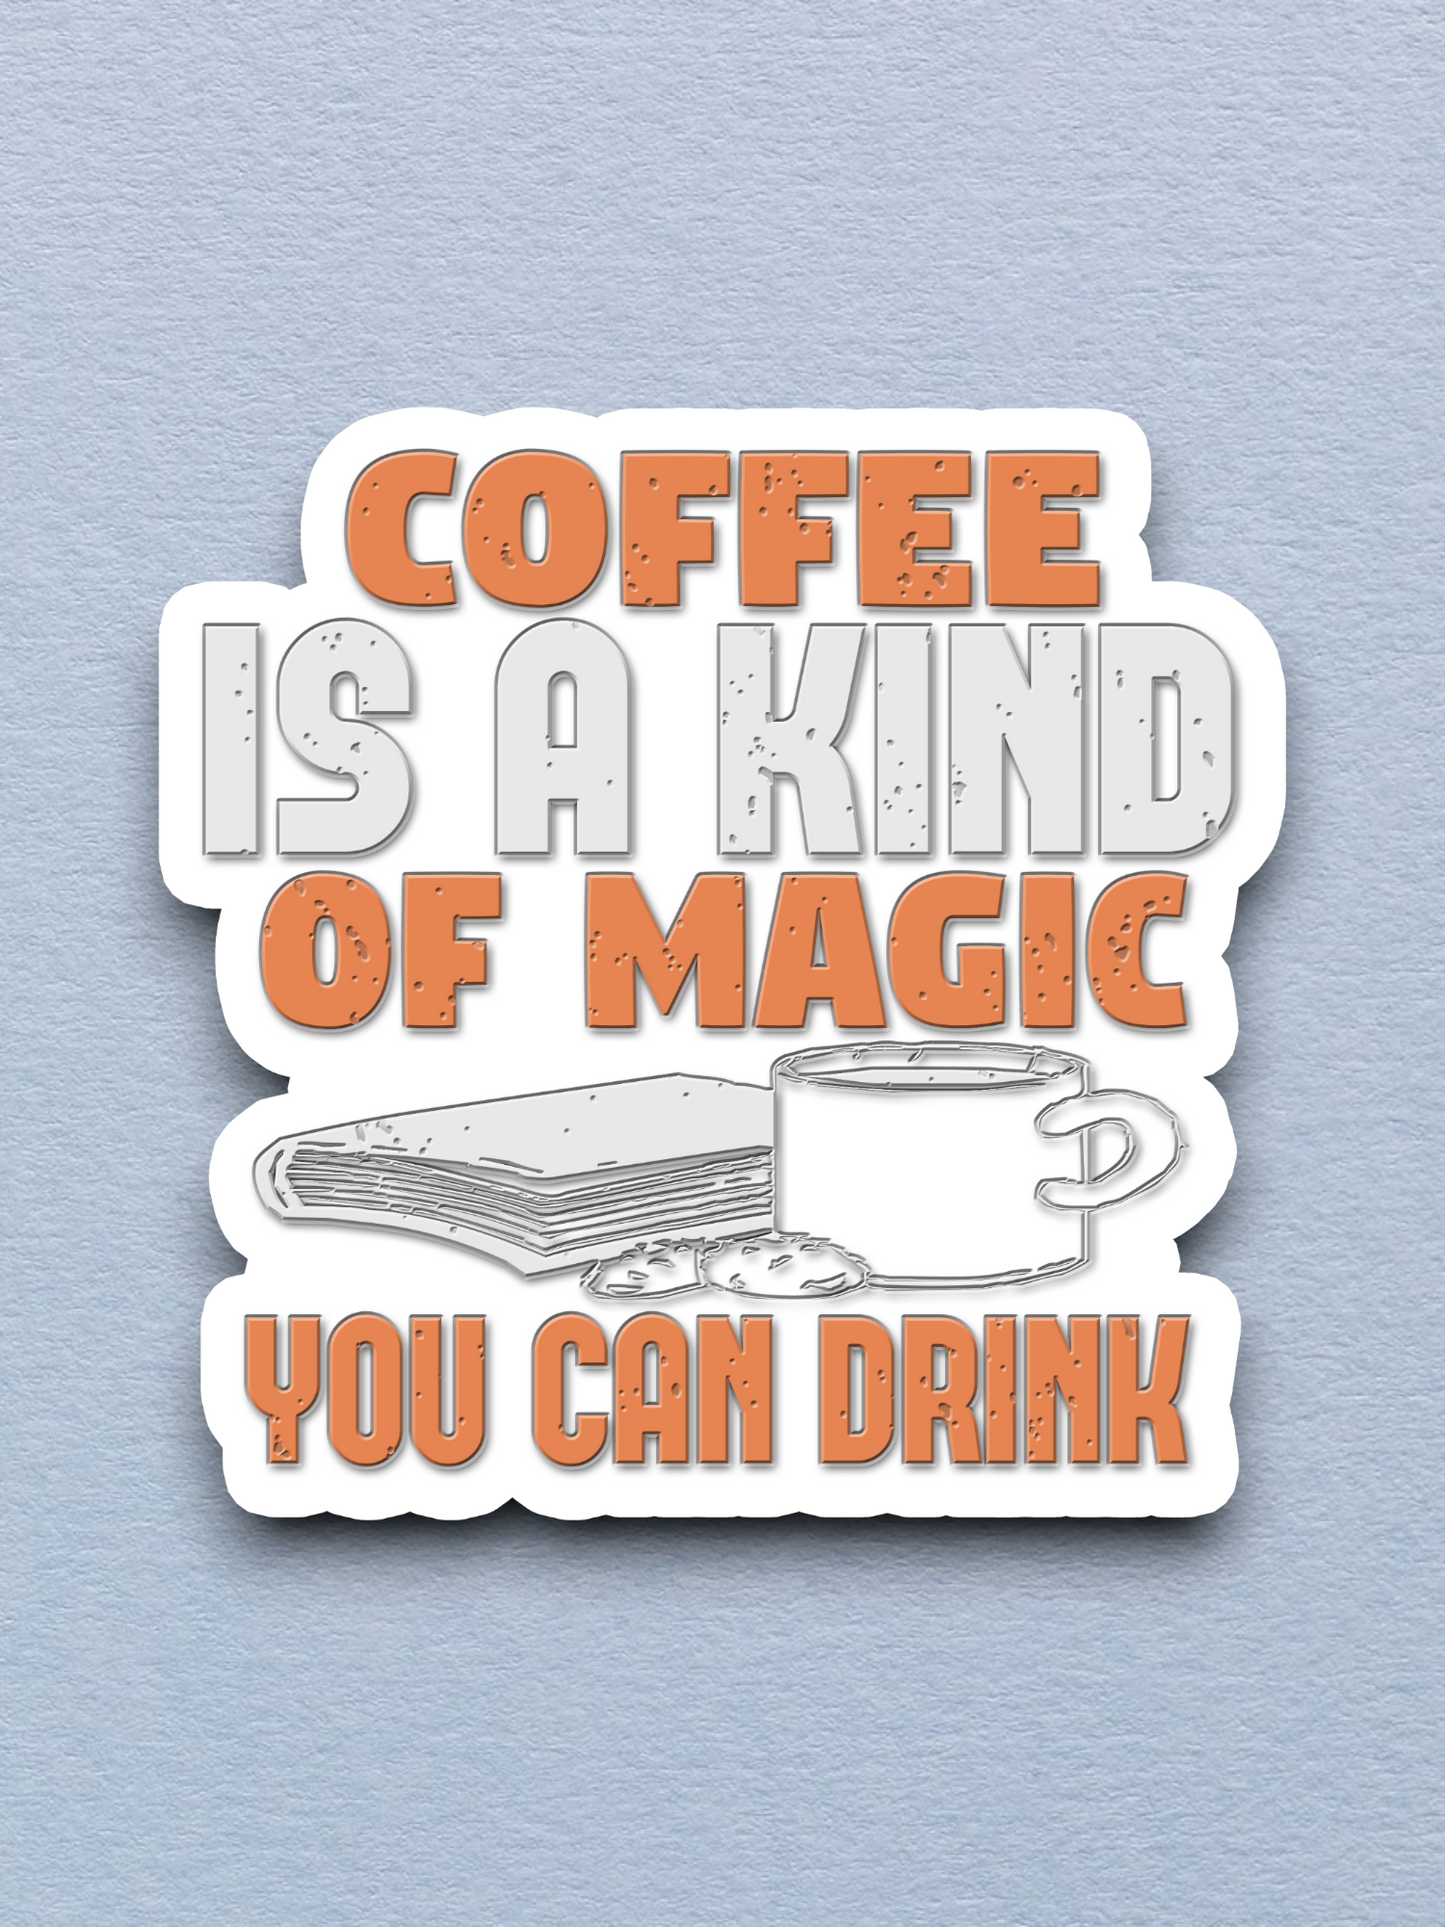 Coffee is Kind of Magic You Can Drink - Coffee Sticker